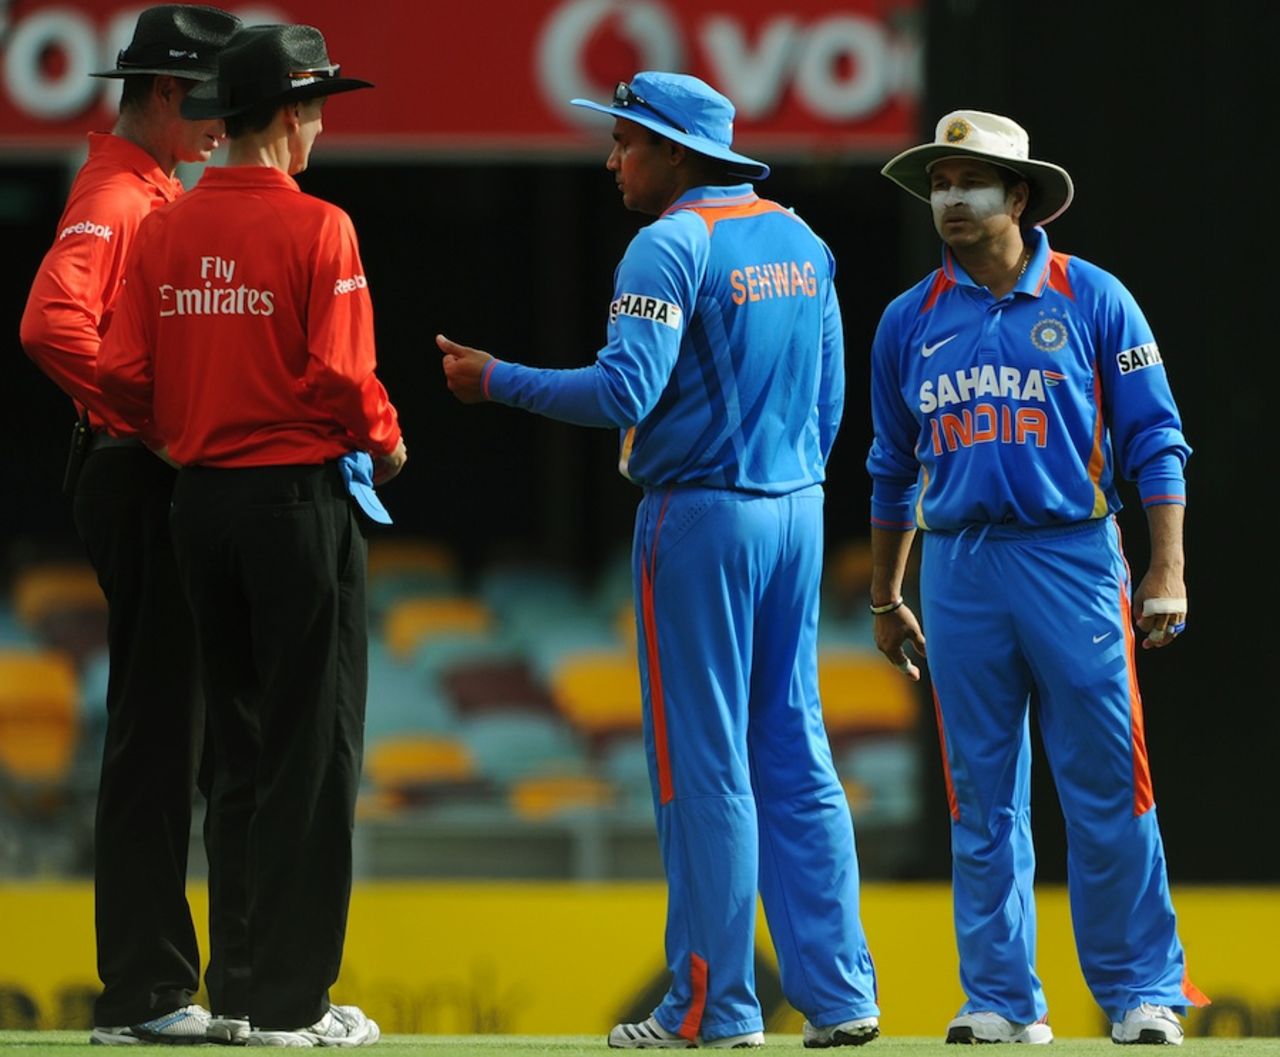 Virender Sehwag withdrew R Ashwin's appeal for a run-out against Lahiru Thirimanne, who was backing up too far at the non-striker's end before the bowler delivered the ball, India v Sri Lanka, CB Series, Brisbane, February 21, 2012